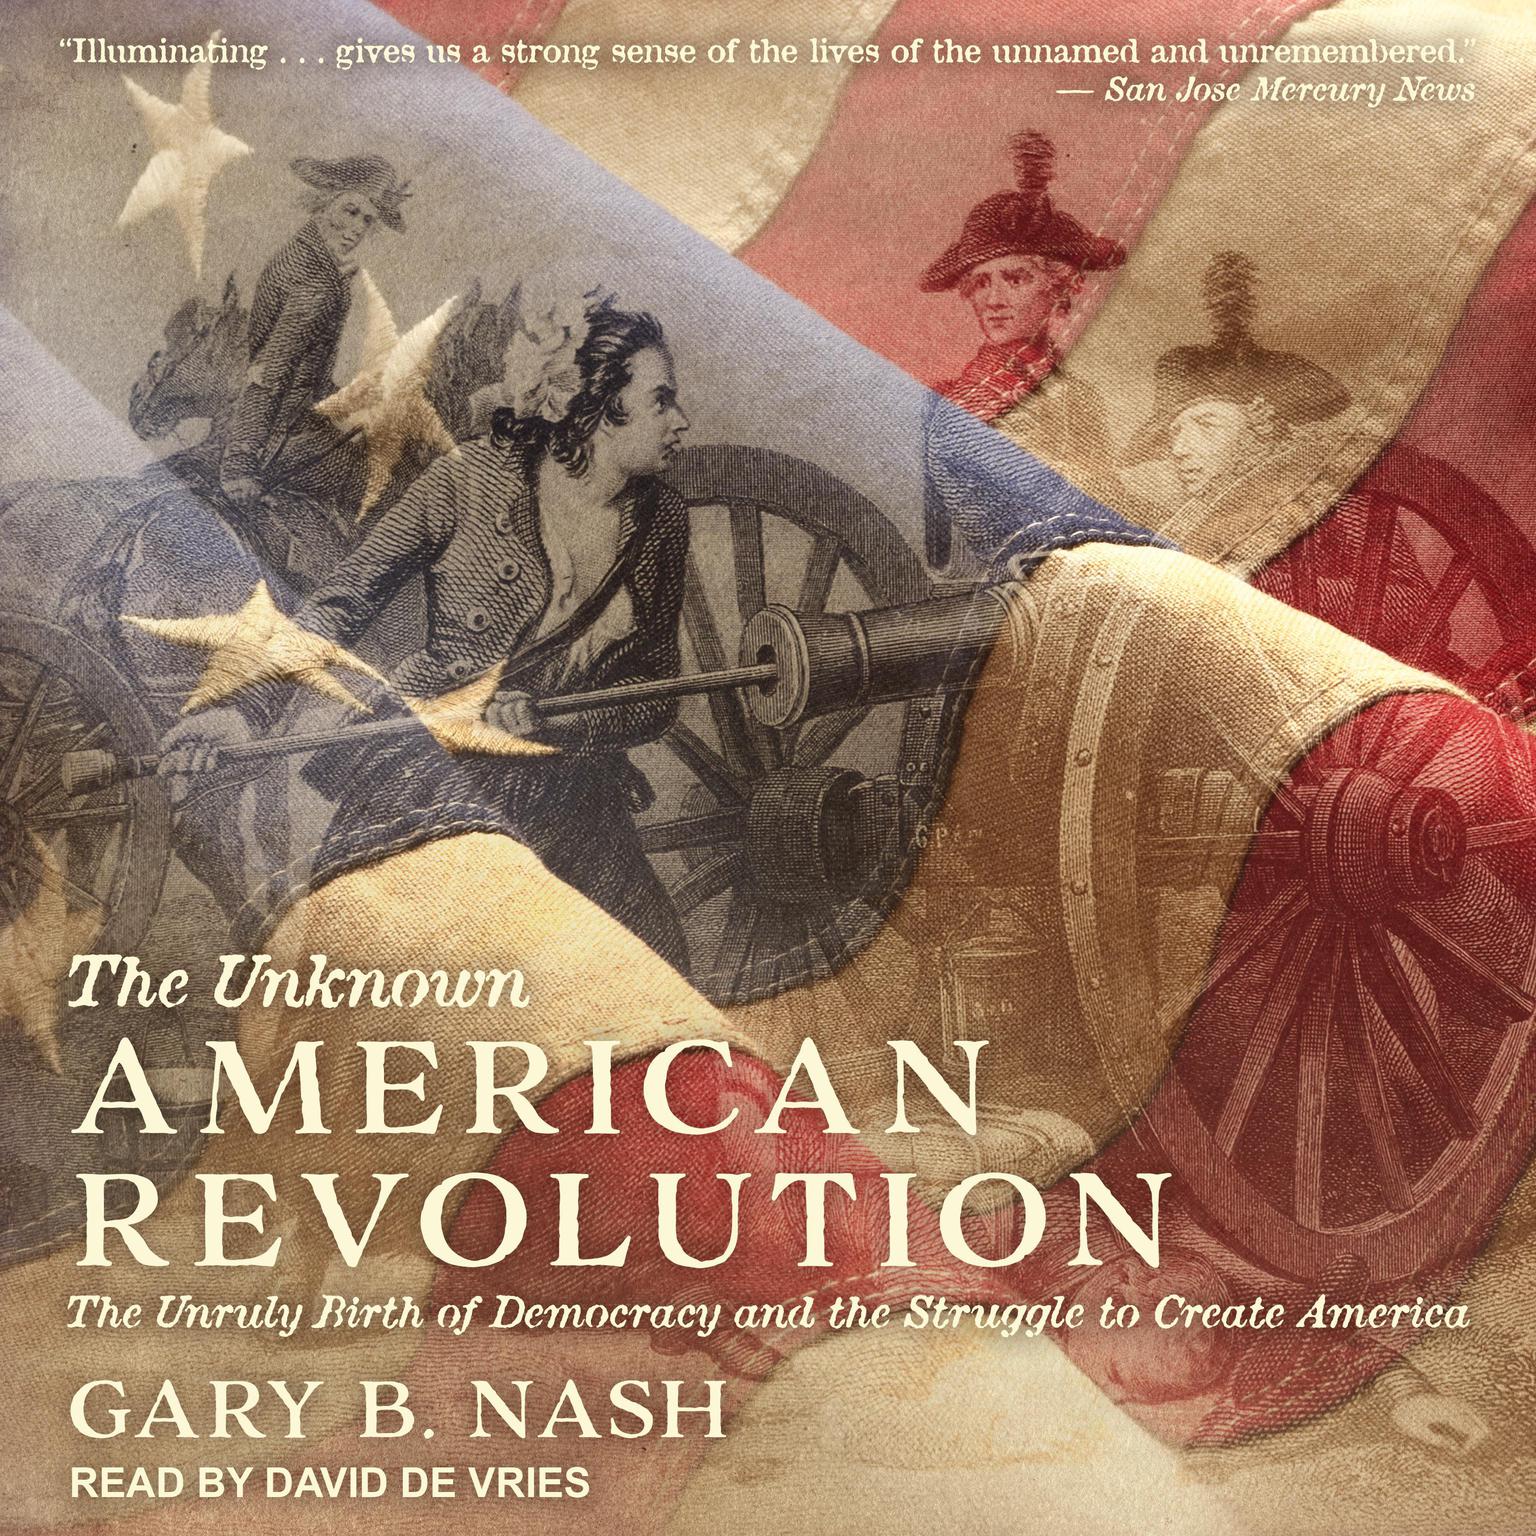 The Unknown American Revolution: The Unruly Birth of Democracy and the Struggle to Create America Audiobook, by Gary B. Nash